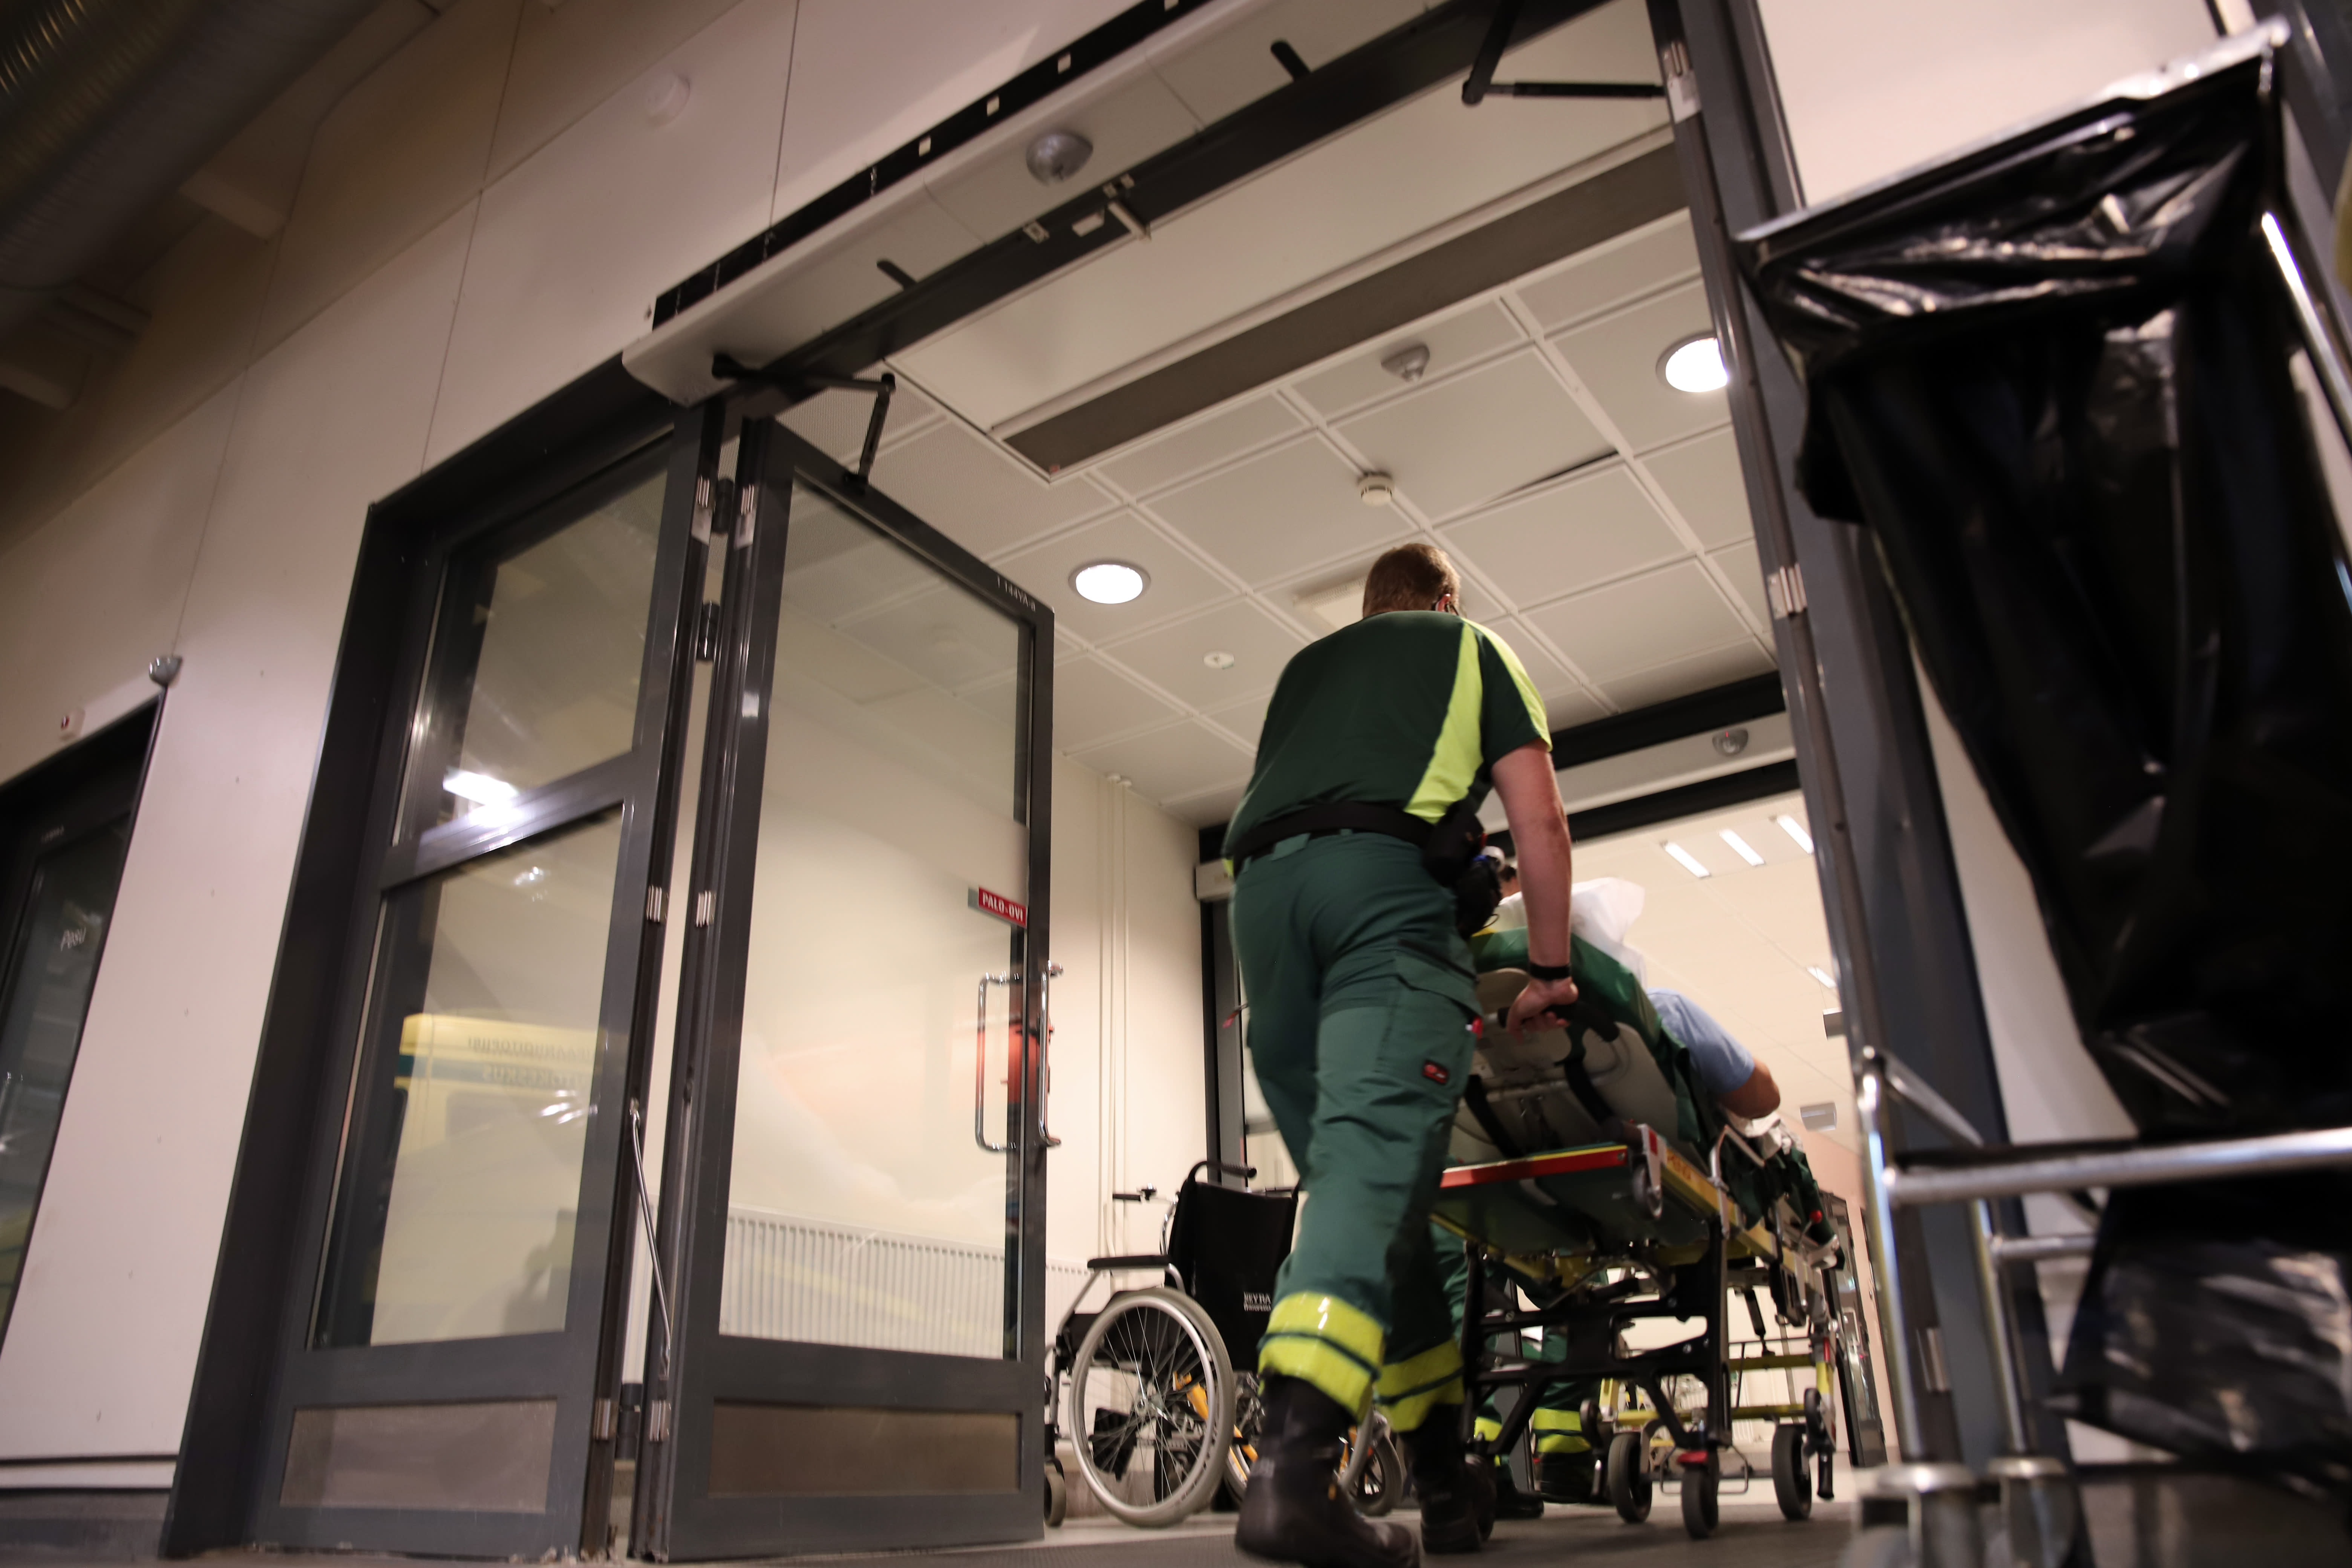 HUS: Helsinki’s hospitals are severely overcrowded, emergency rooms full